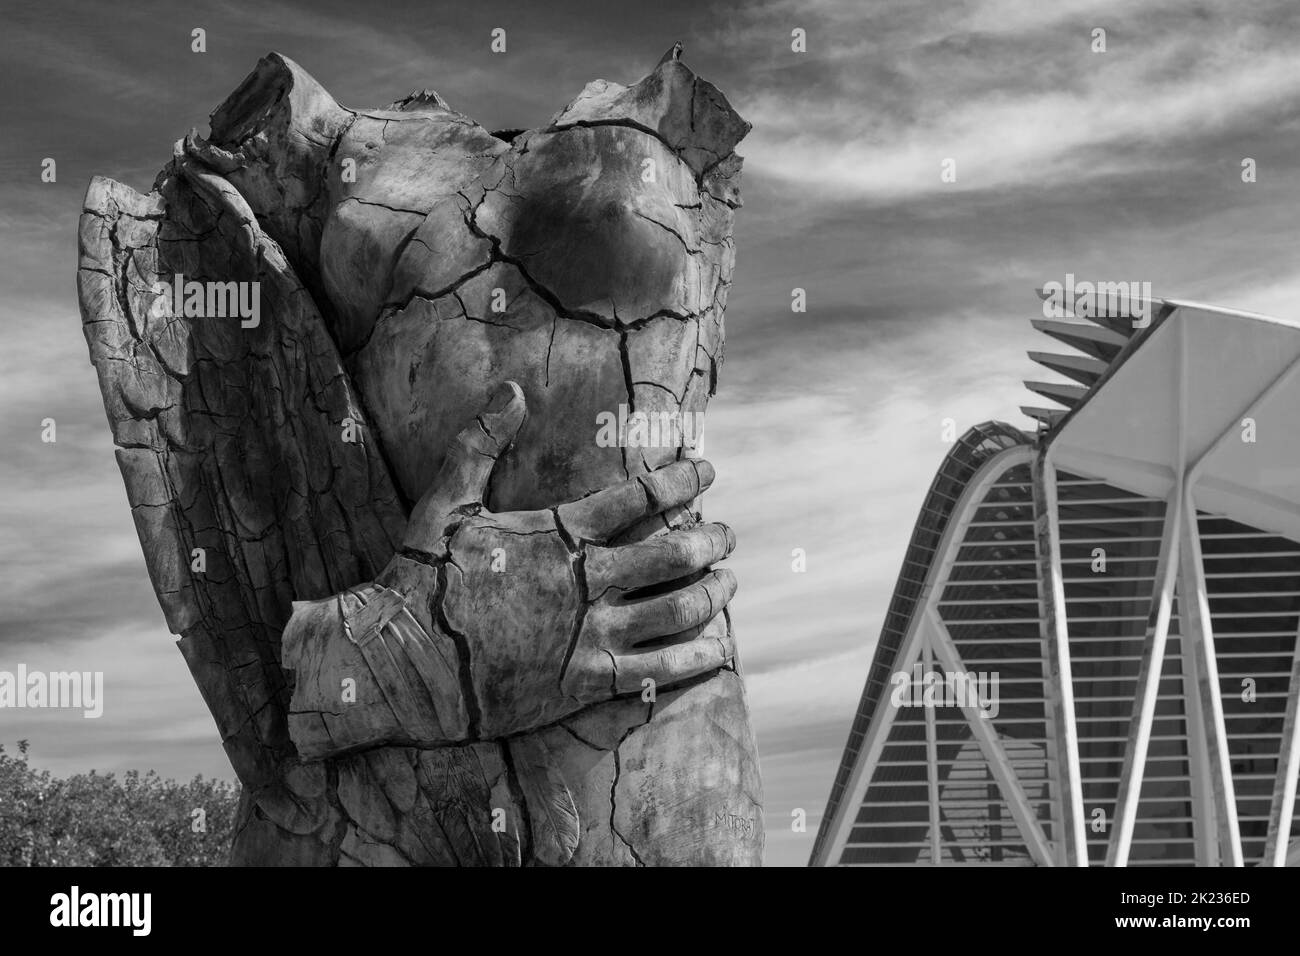 Body sculpture by Museu De Les Ciencies, The Príncipe Felipe Science Museum, at City of Arts and Sciences in Valencia, Spain in September Stock Photo